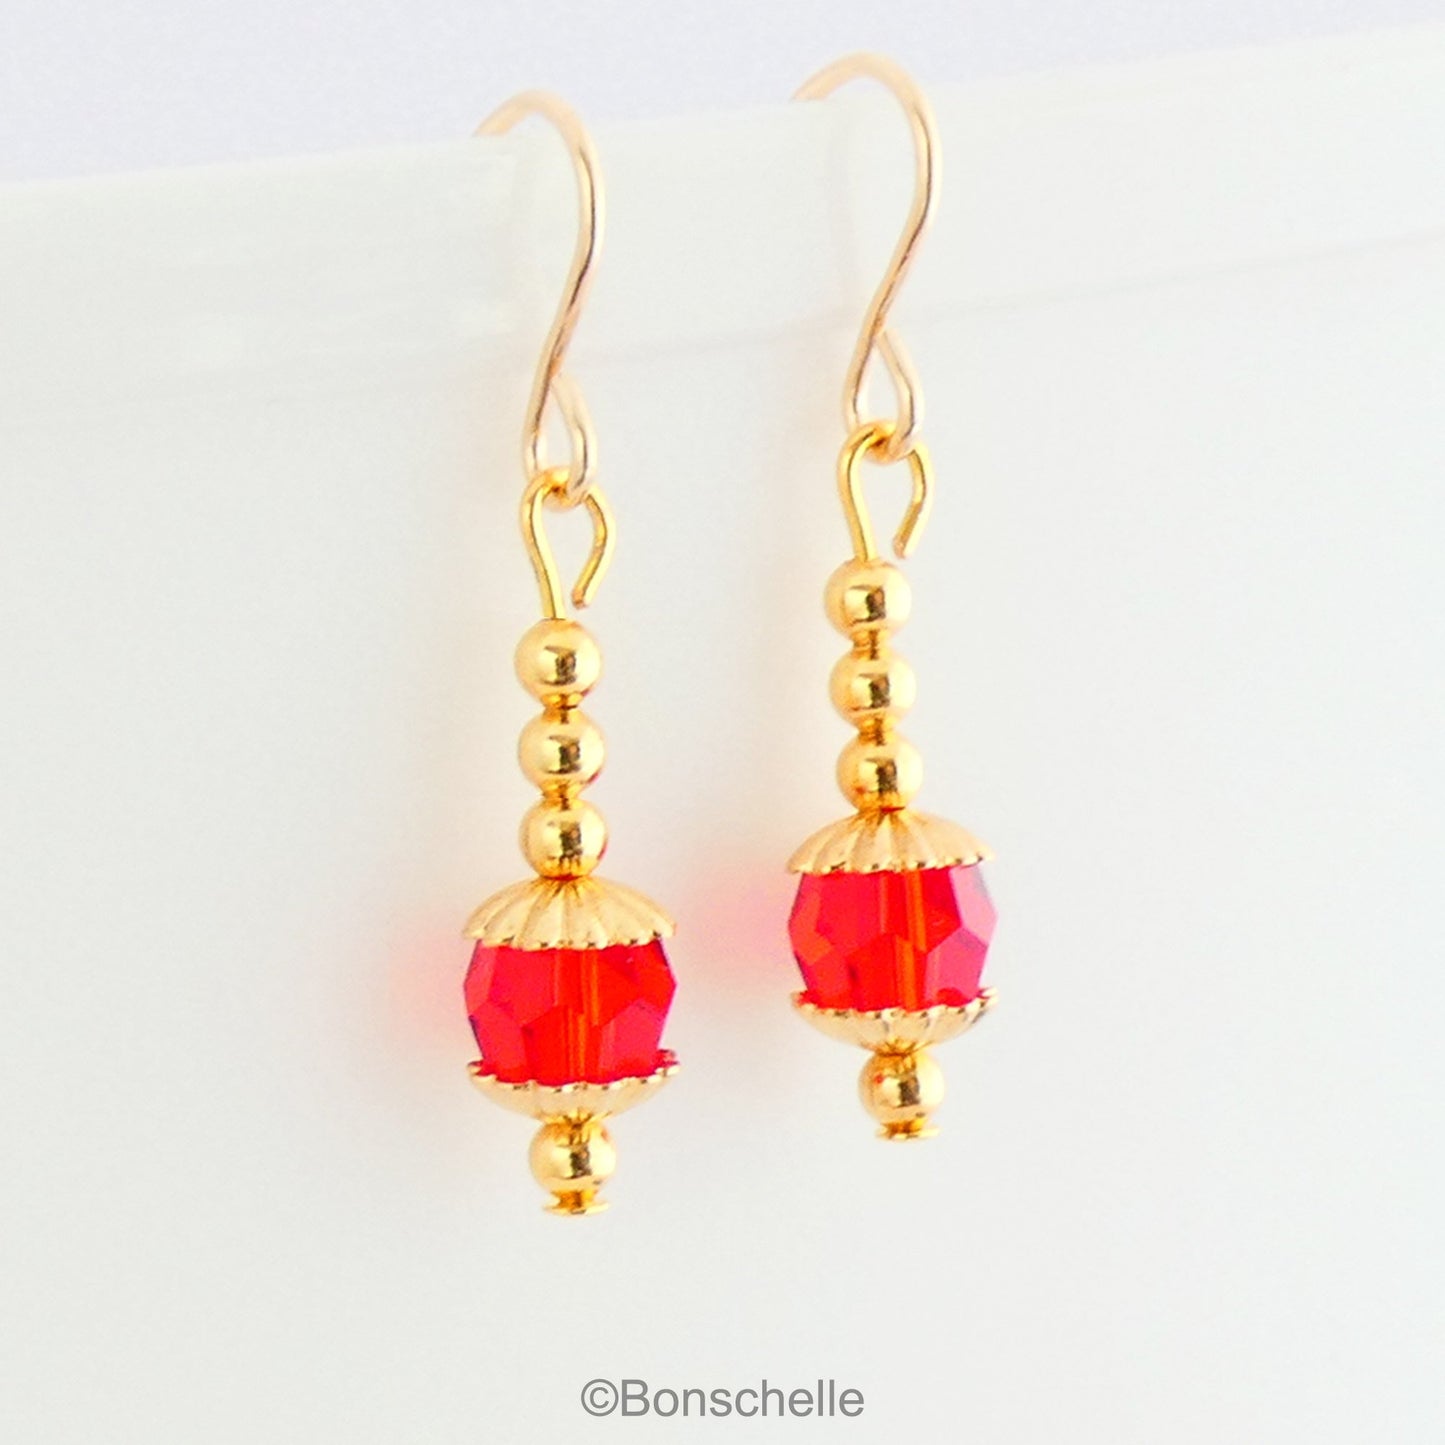 Drop earrings with a single bright red Swarovksi crystal beads, 3 smaller gold toned metal beads and 14K gold filled earwires.